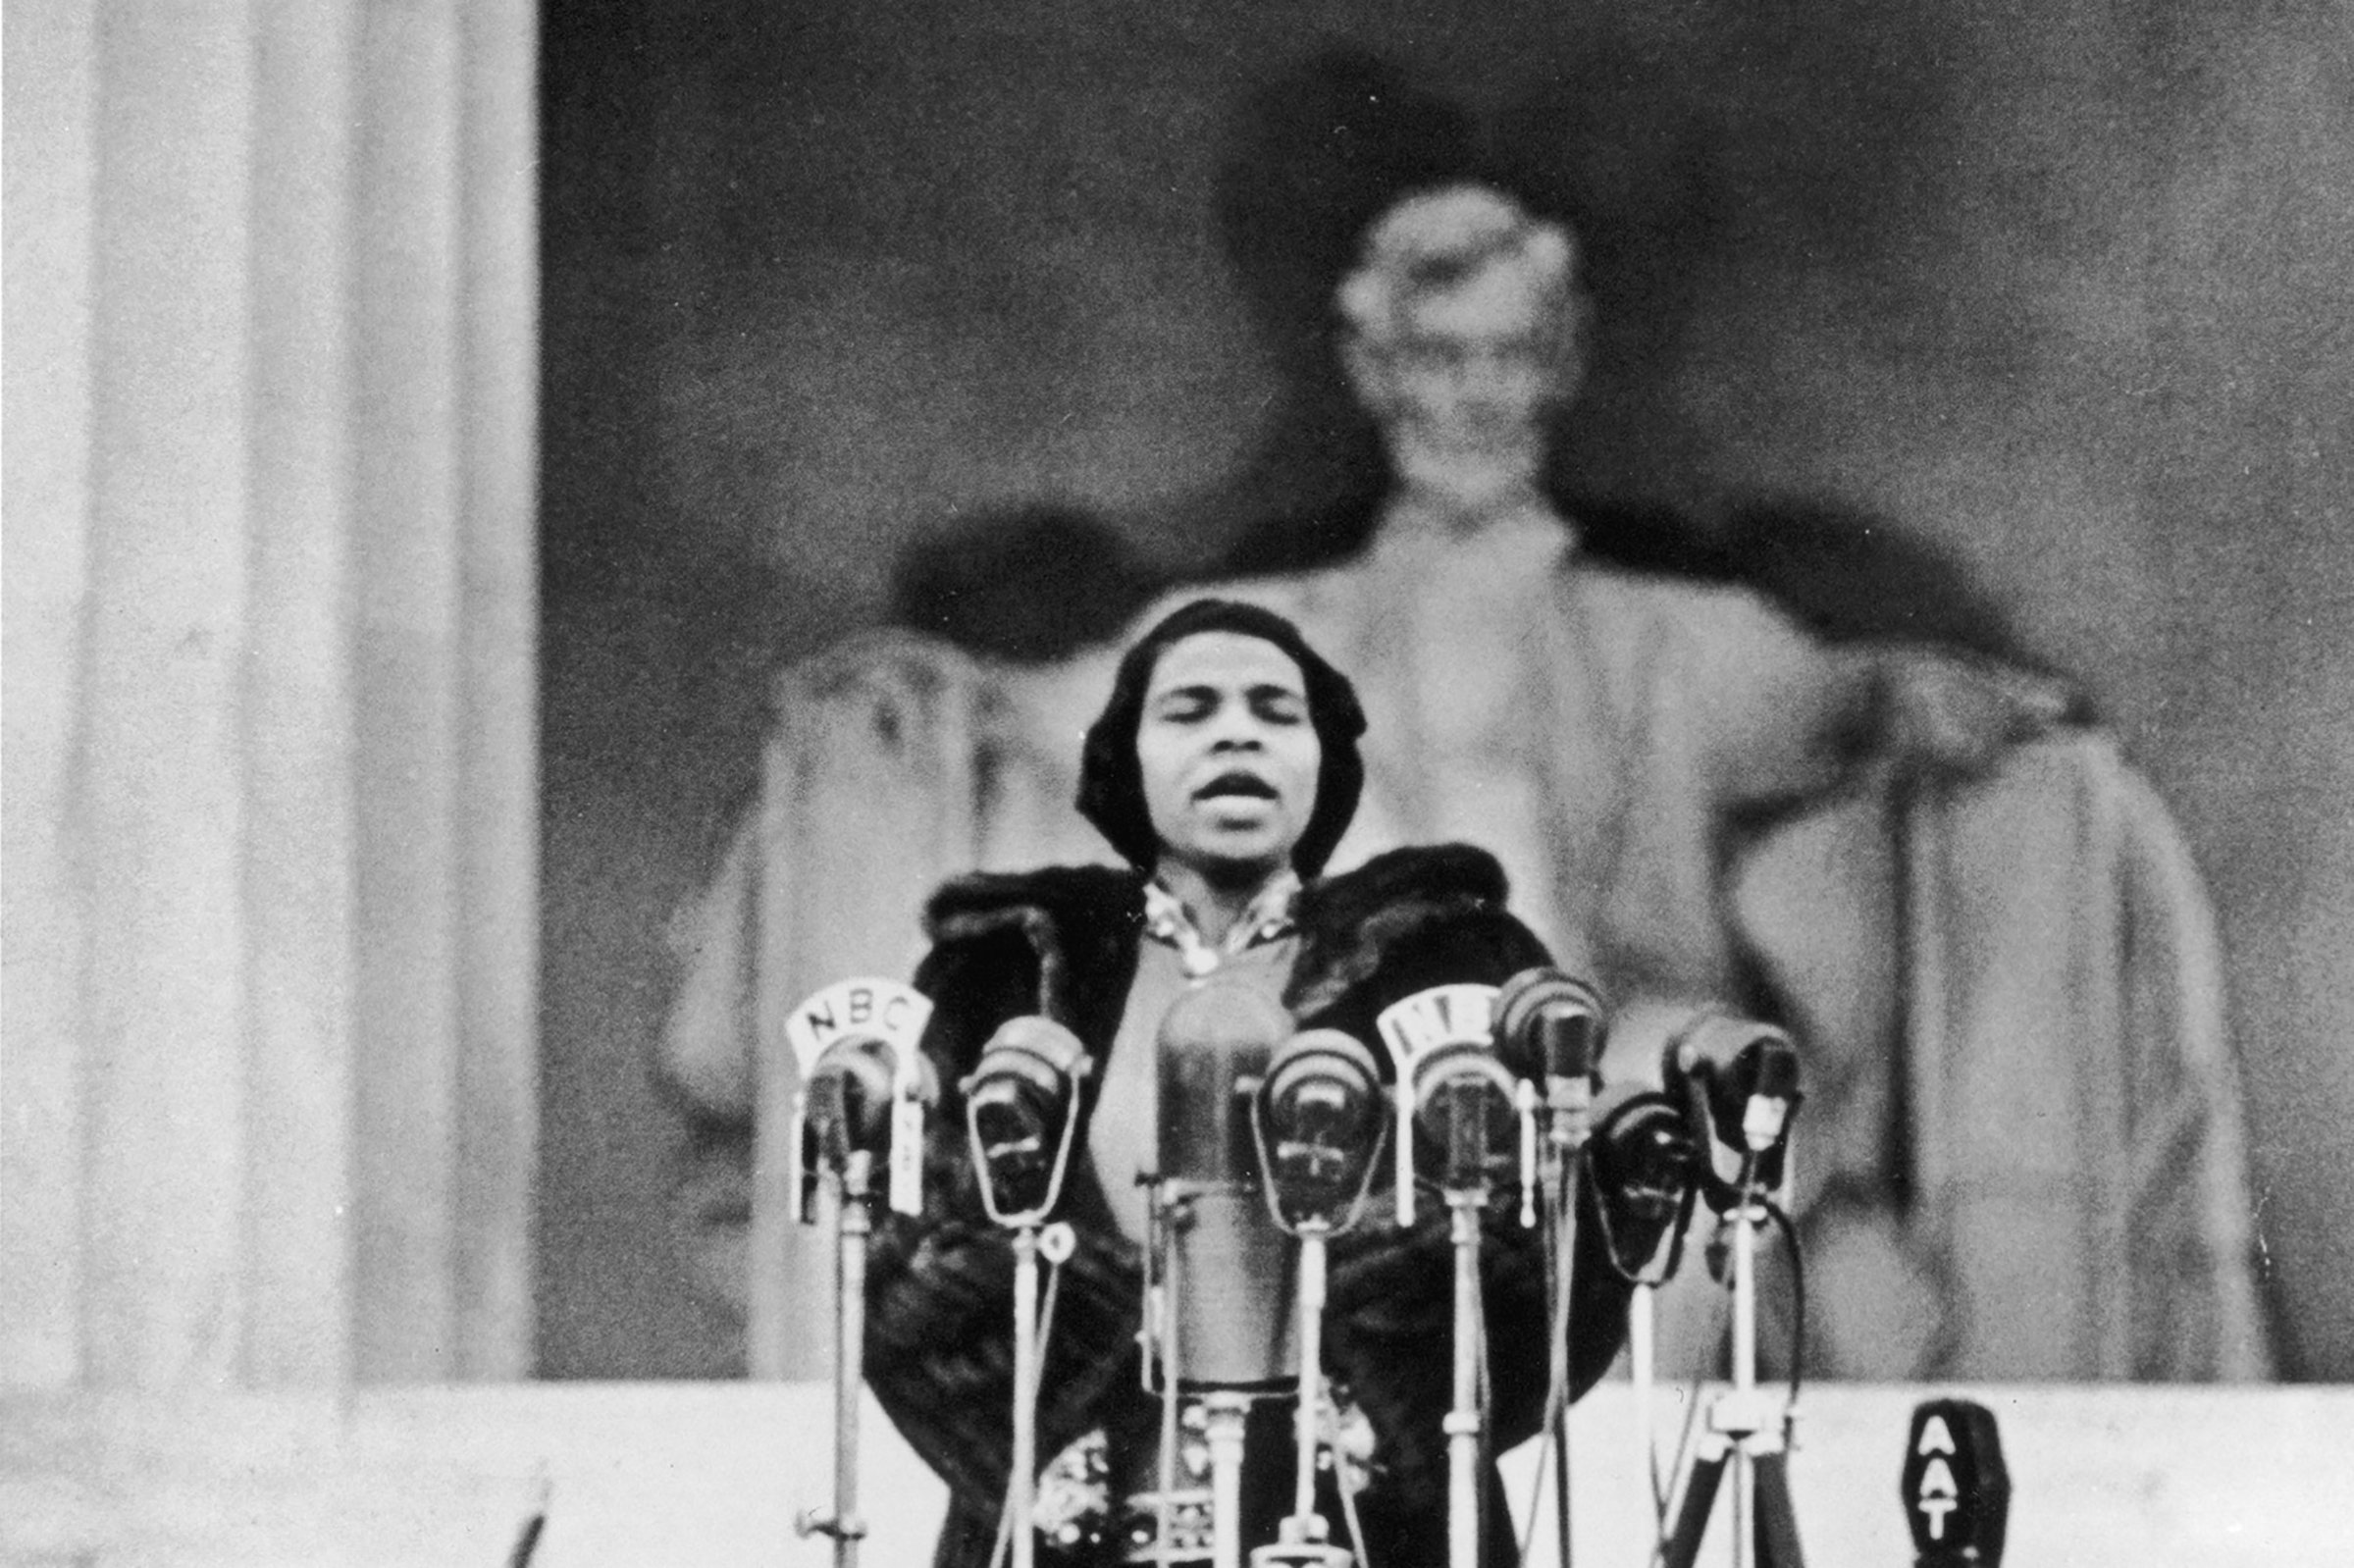 Singer Marian Anderson connects a history of black artistic excellence in America